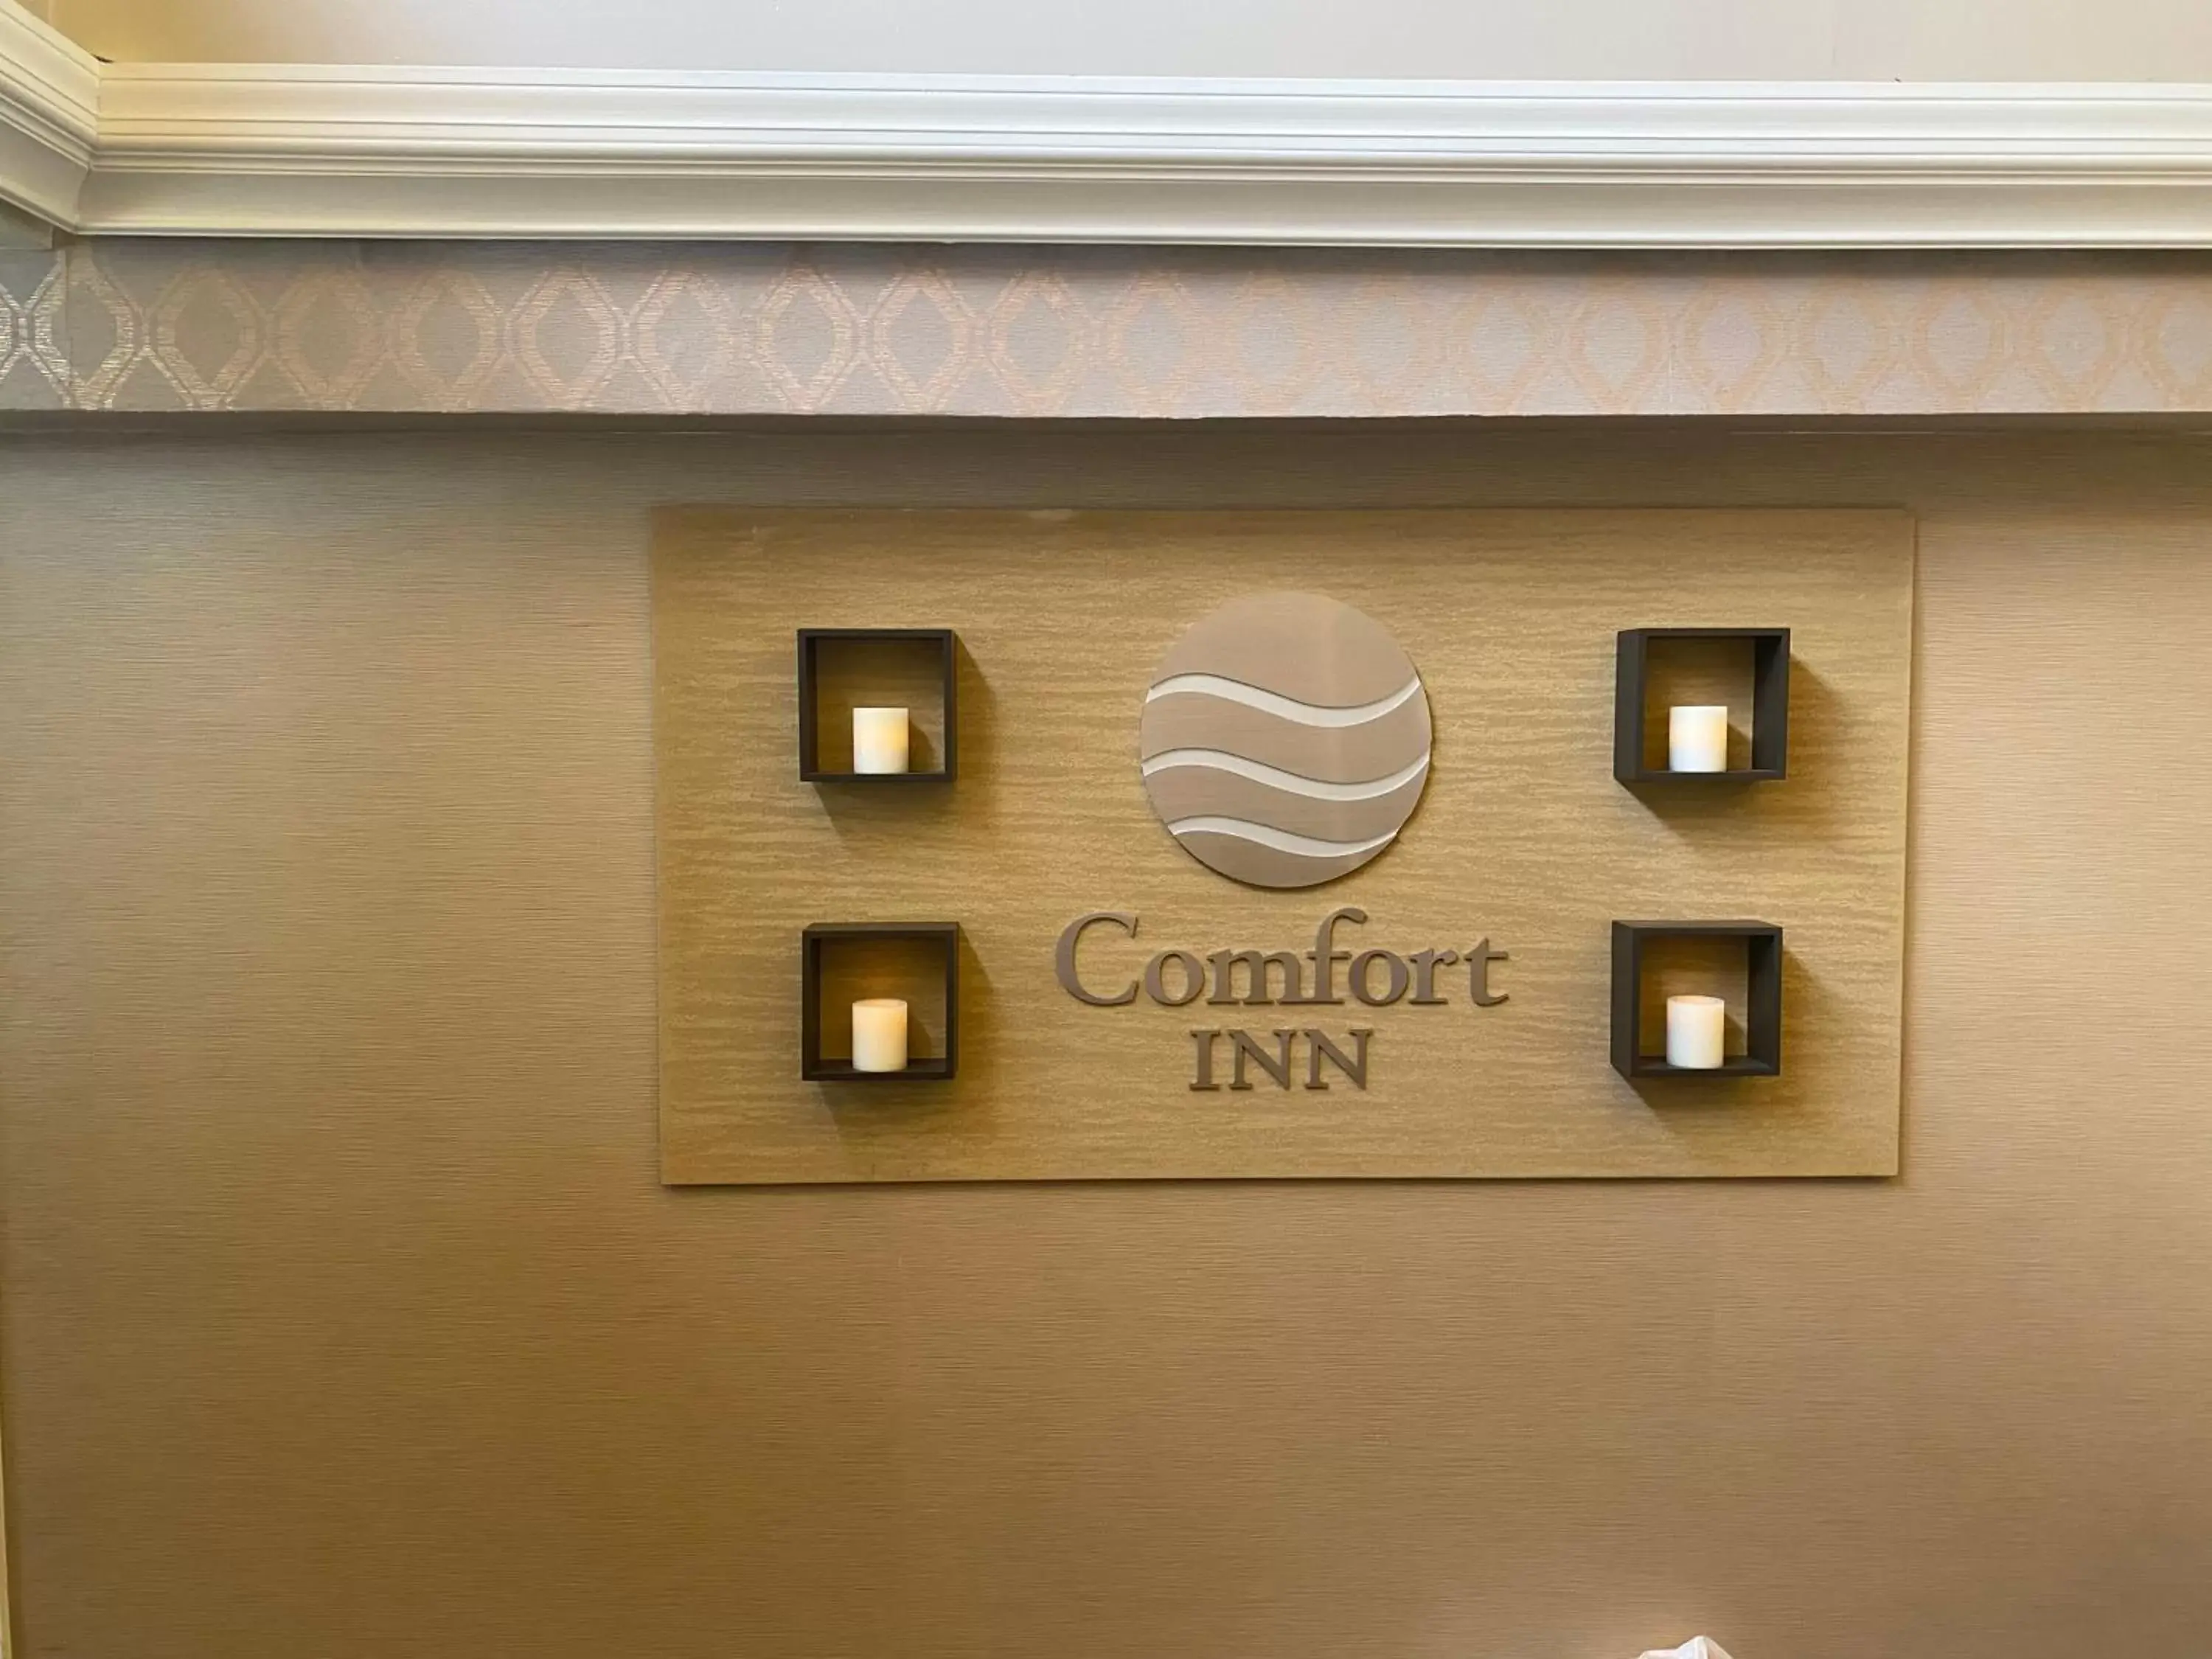 Property logo or sign in Comfort Inn Springfield